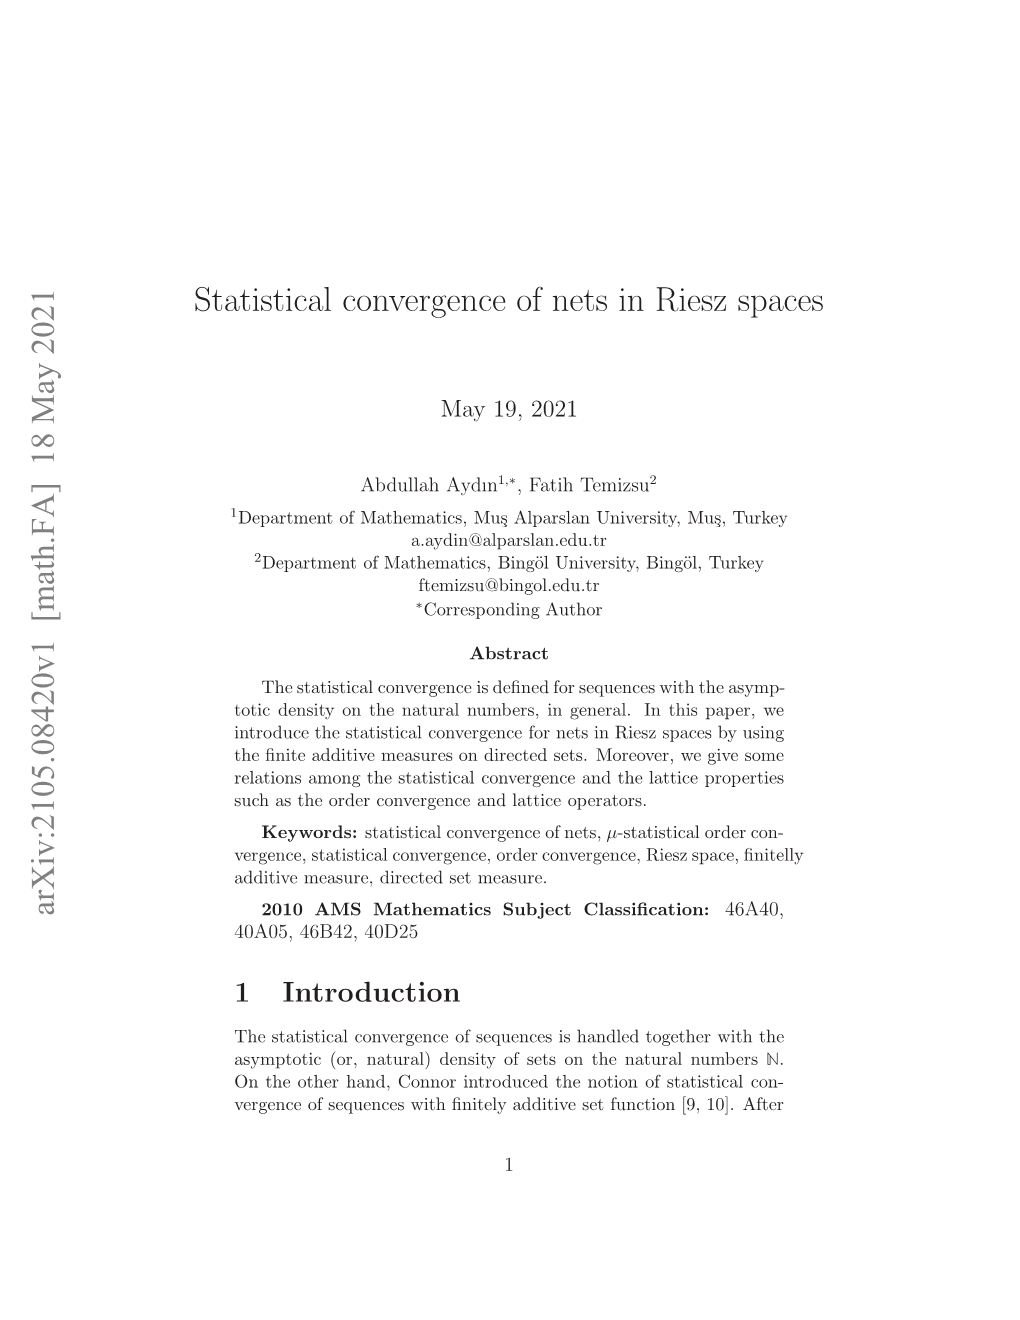 Statistical Convergence of Nets in Riesz Spaces